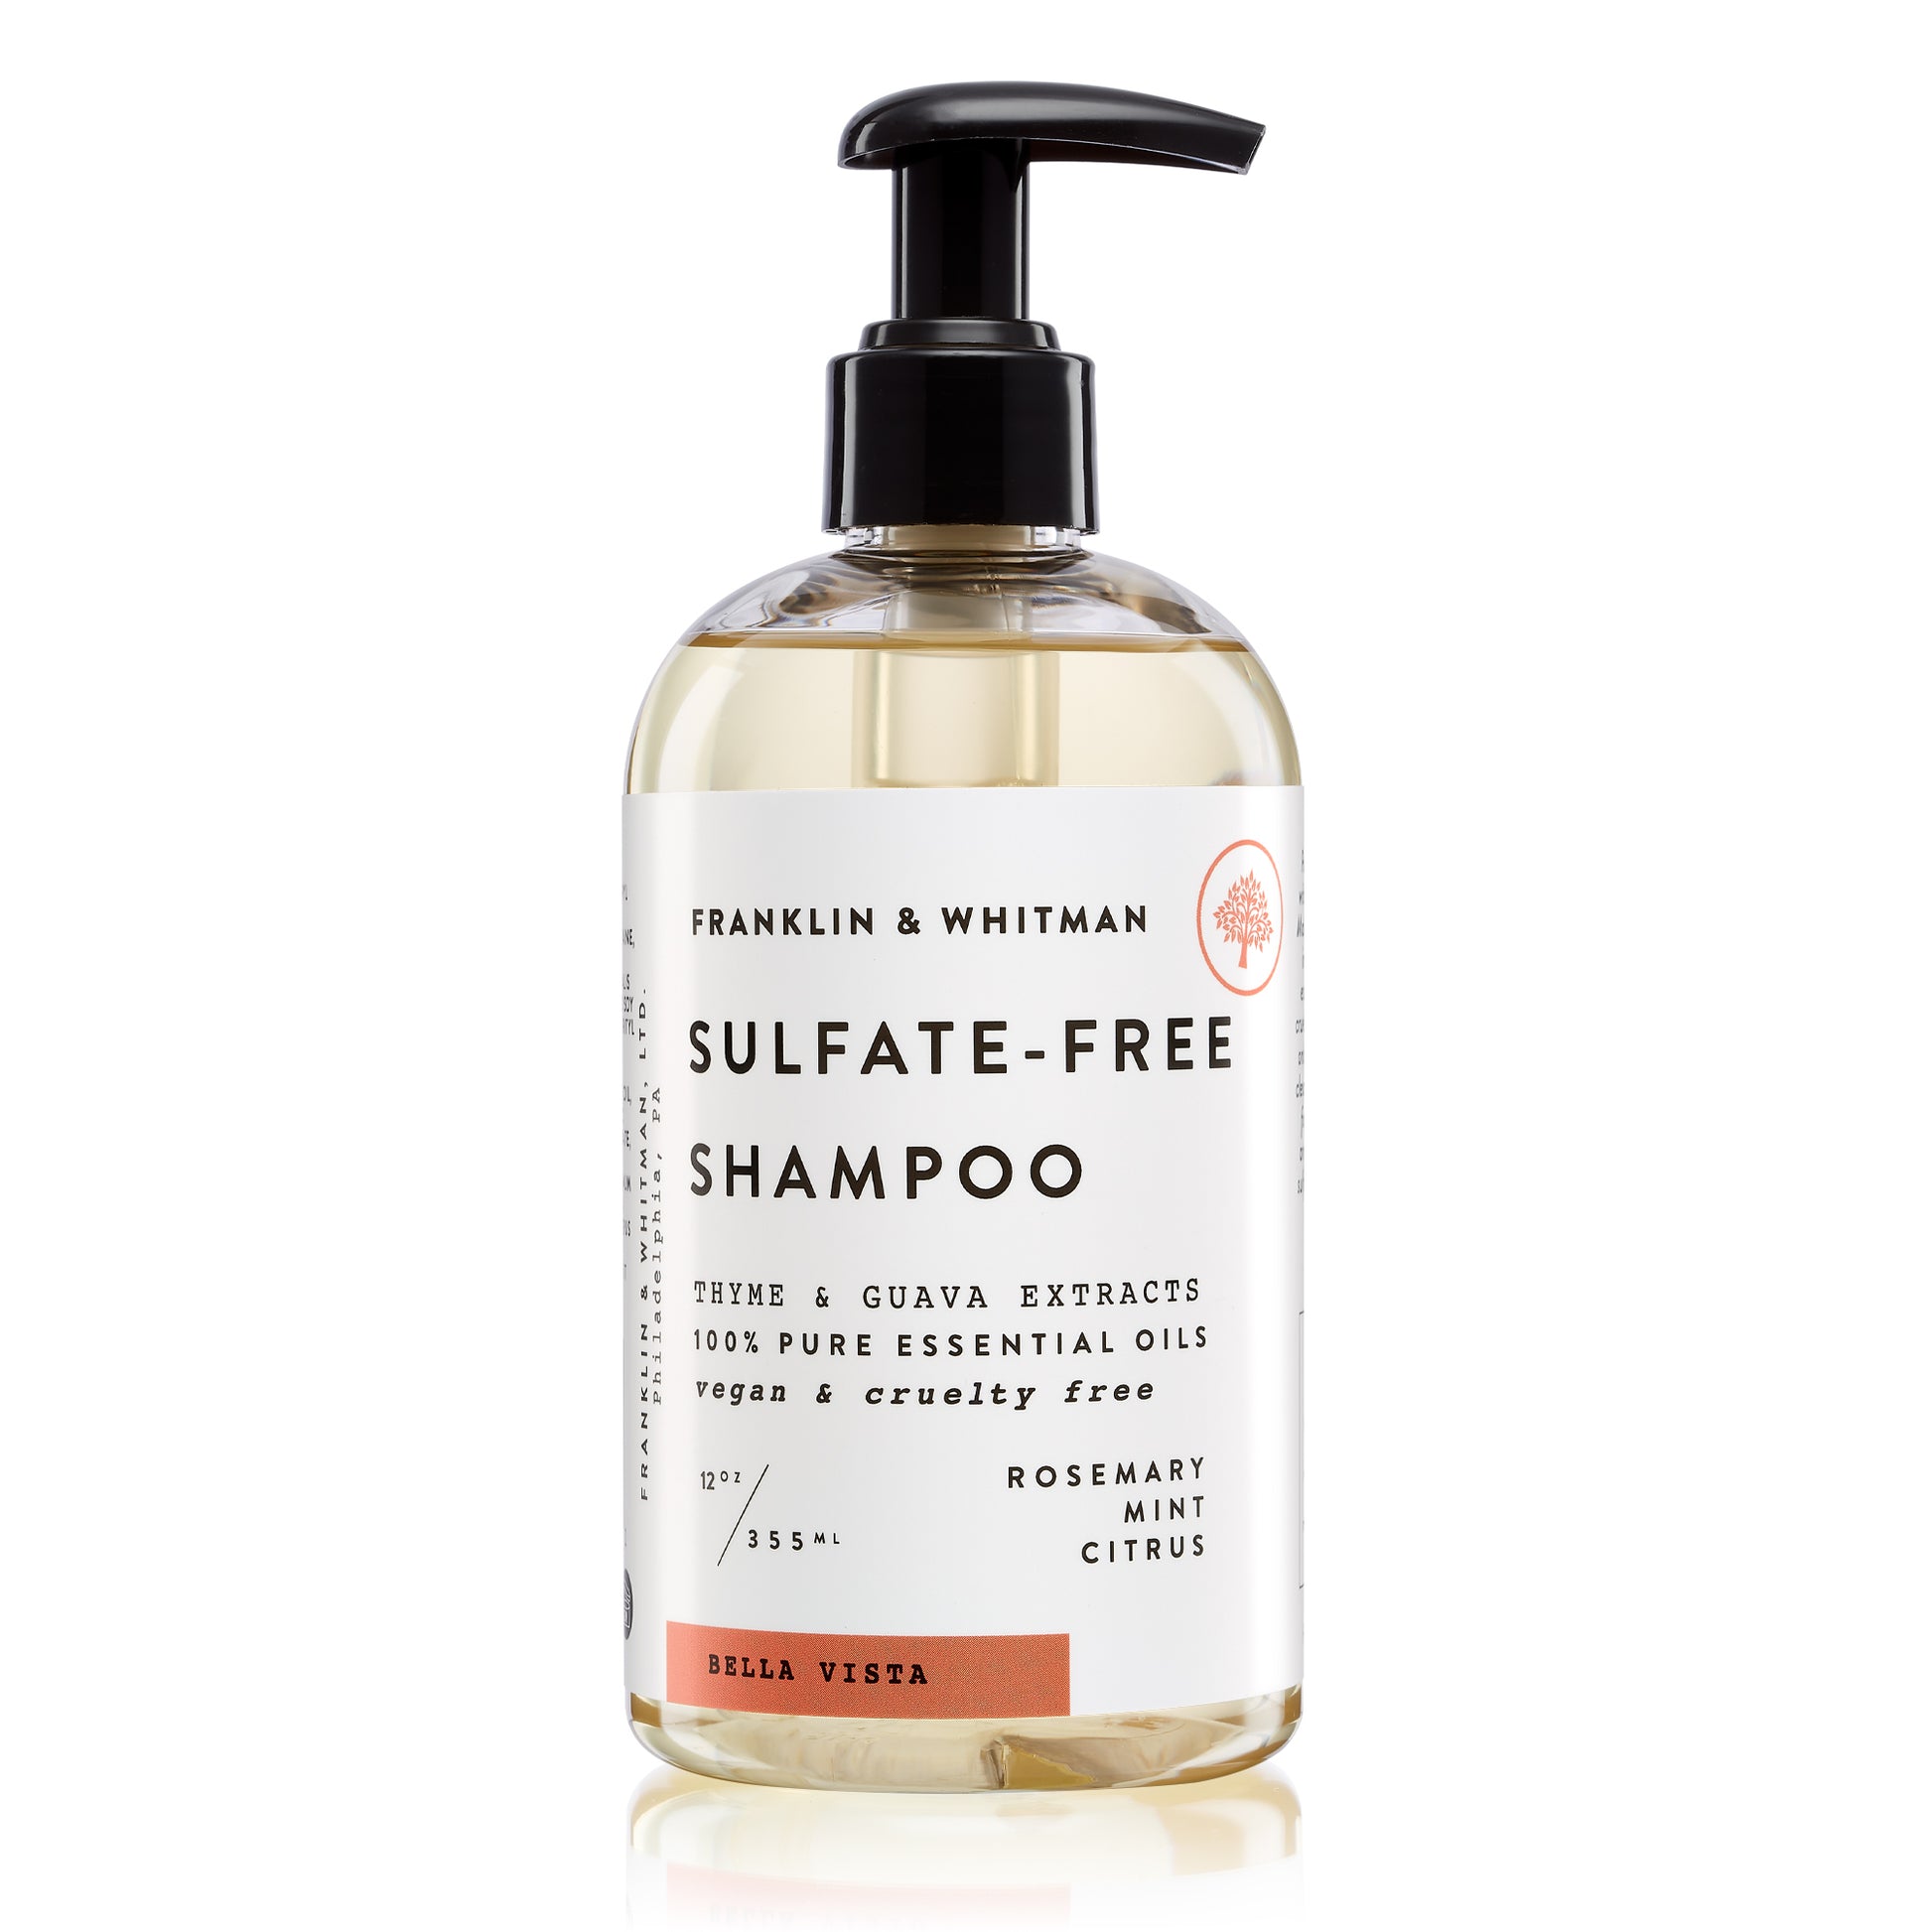 Benefits of Sulfate-Free Shampoos